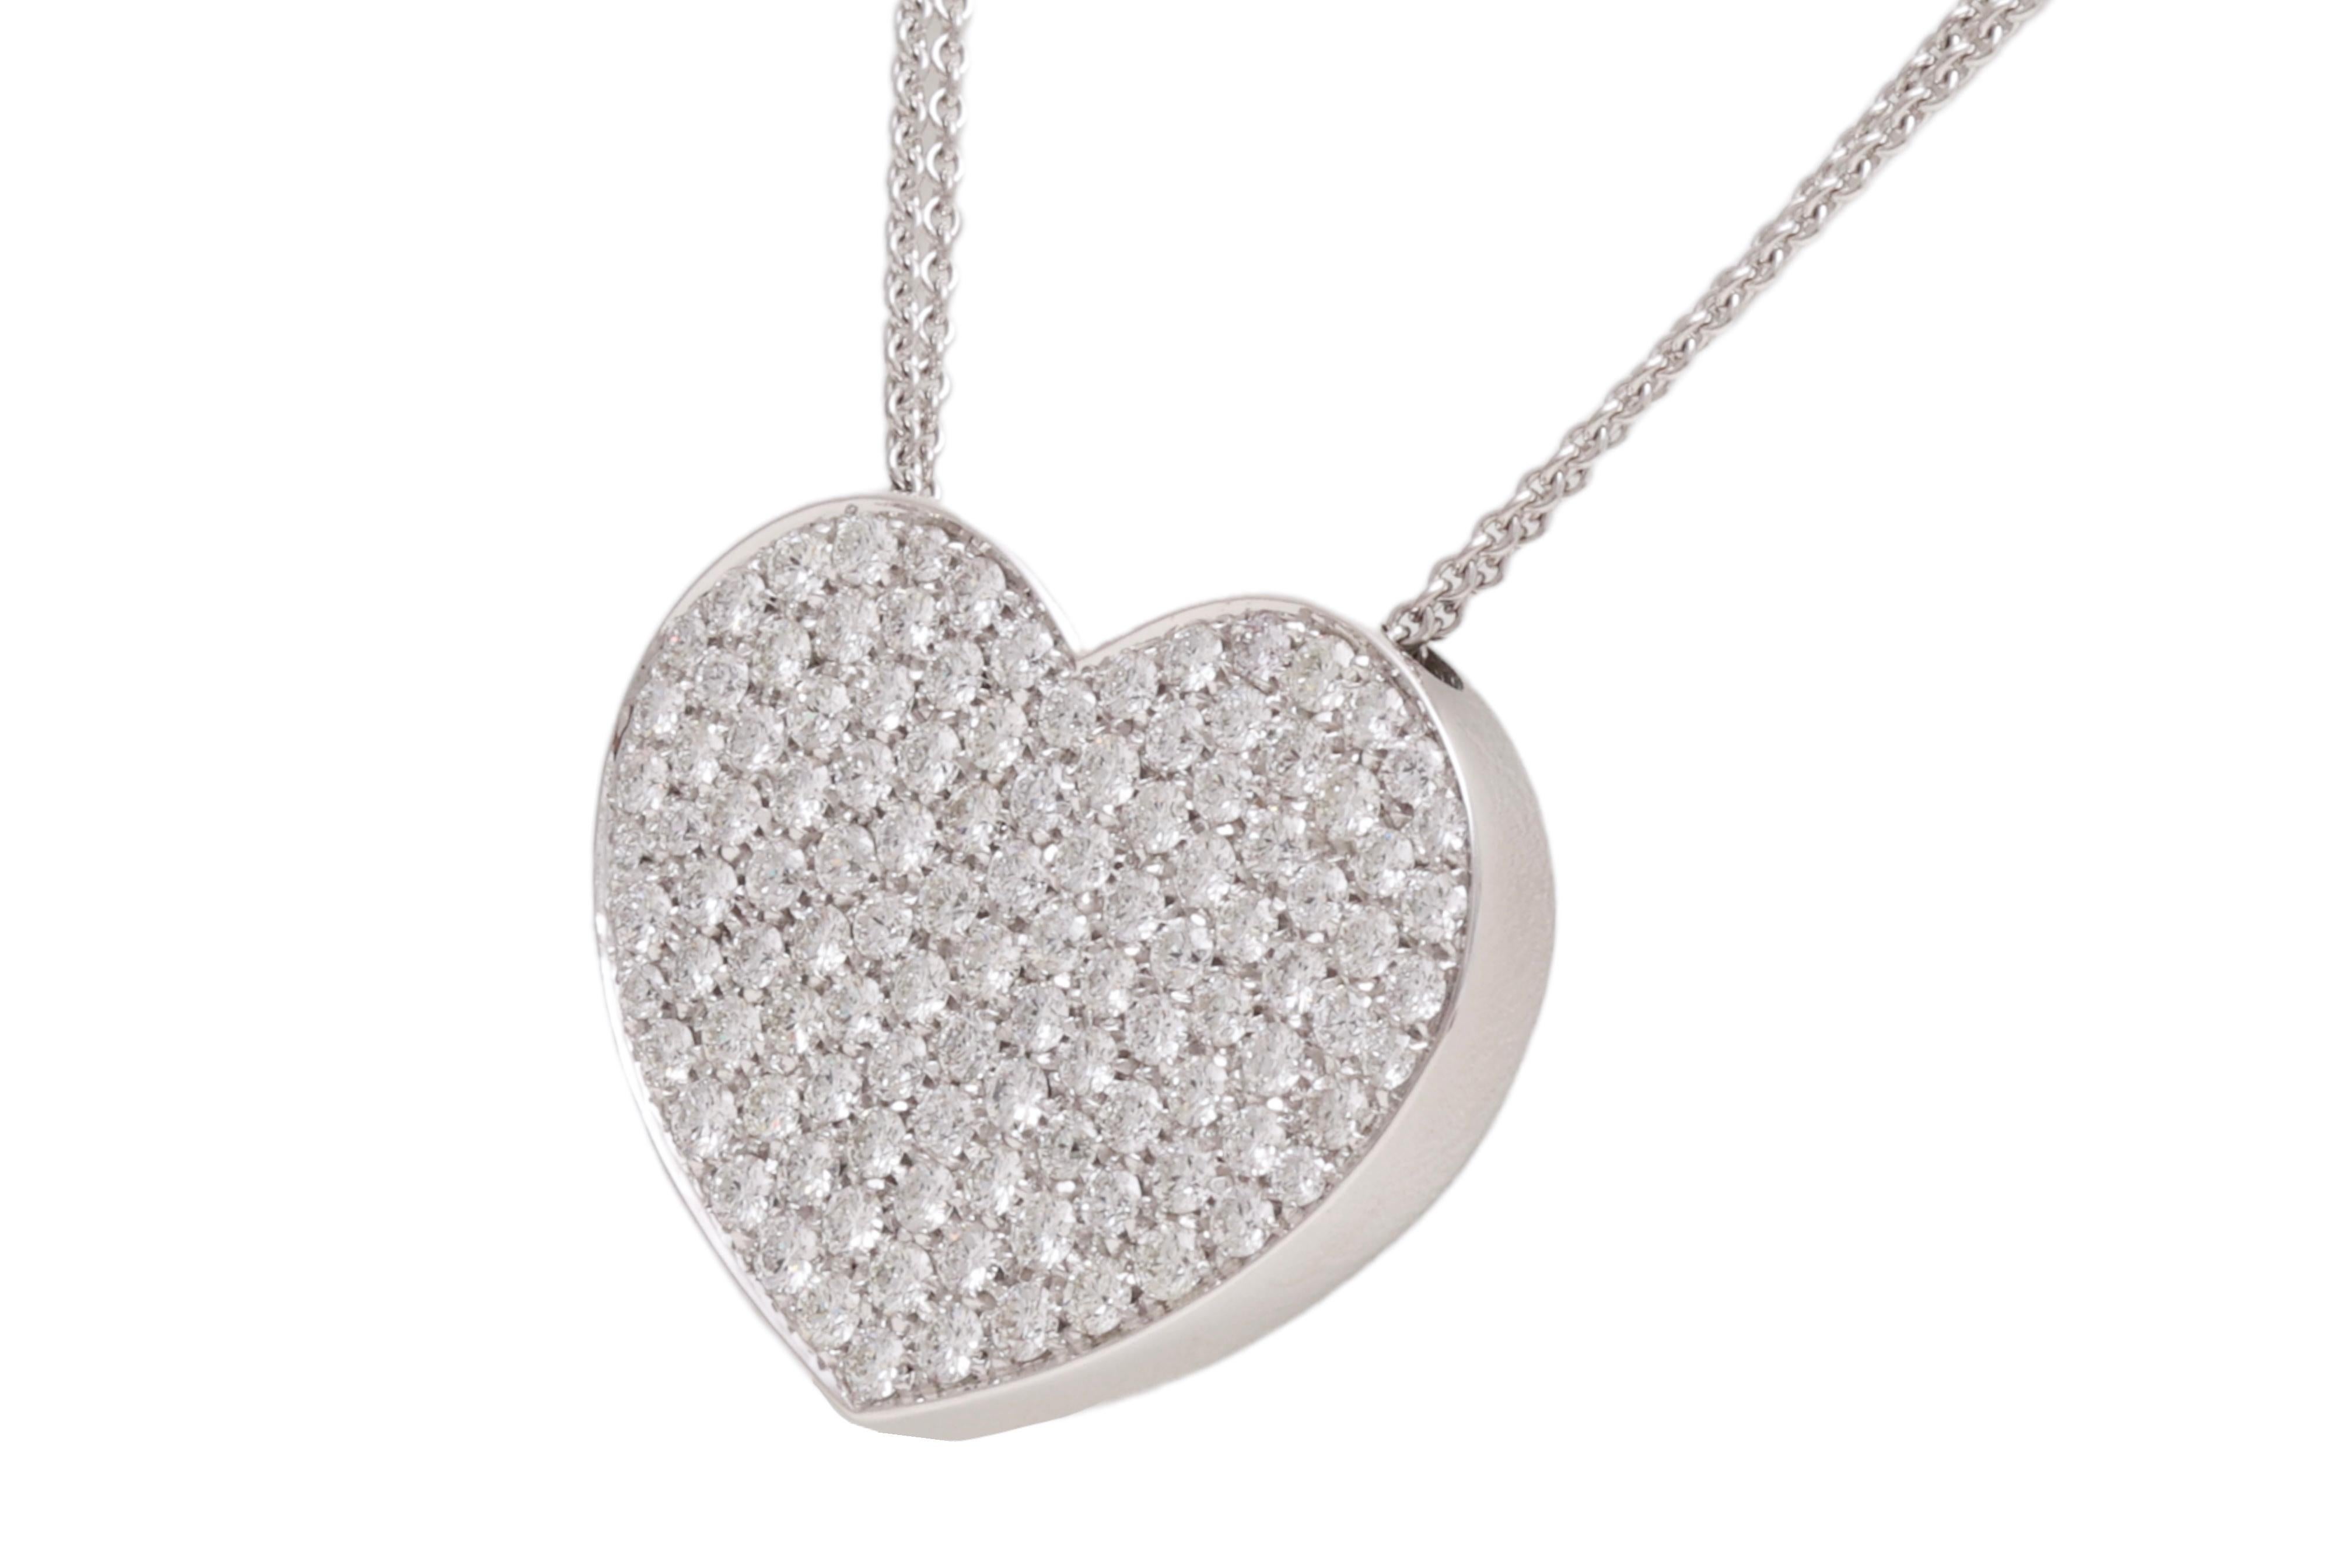 Stunning 18kt White Gold Heart Shaped Necklace Set With 3.40ct Diamonds, Comes with a fancy 18kt white gold double chain

Diamonds: Brilliant cut diamonds together 3.40ct of top

Material: 18kt White gold

Measurements: 31 mm x 25.7 mm x 4.4